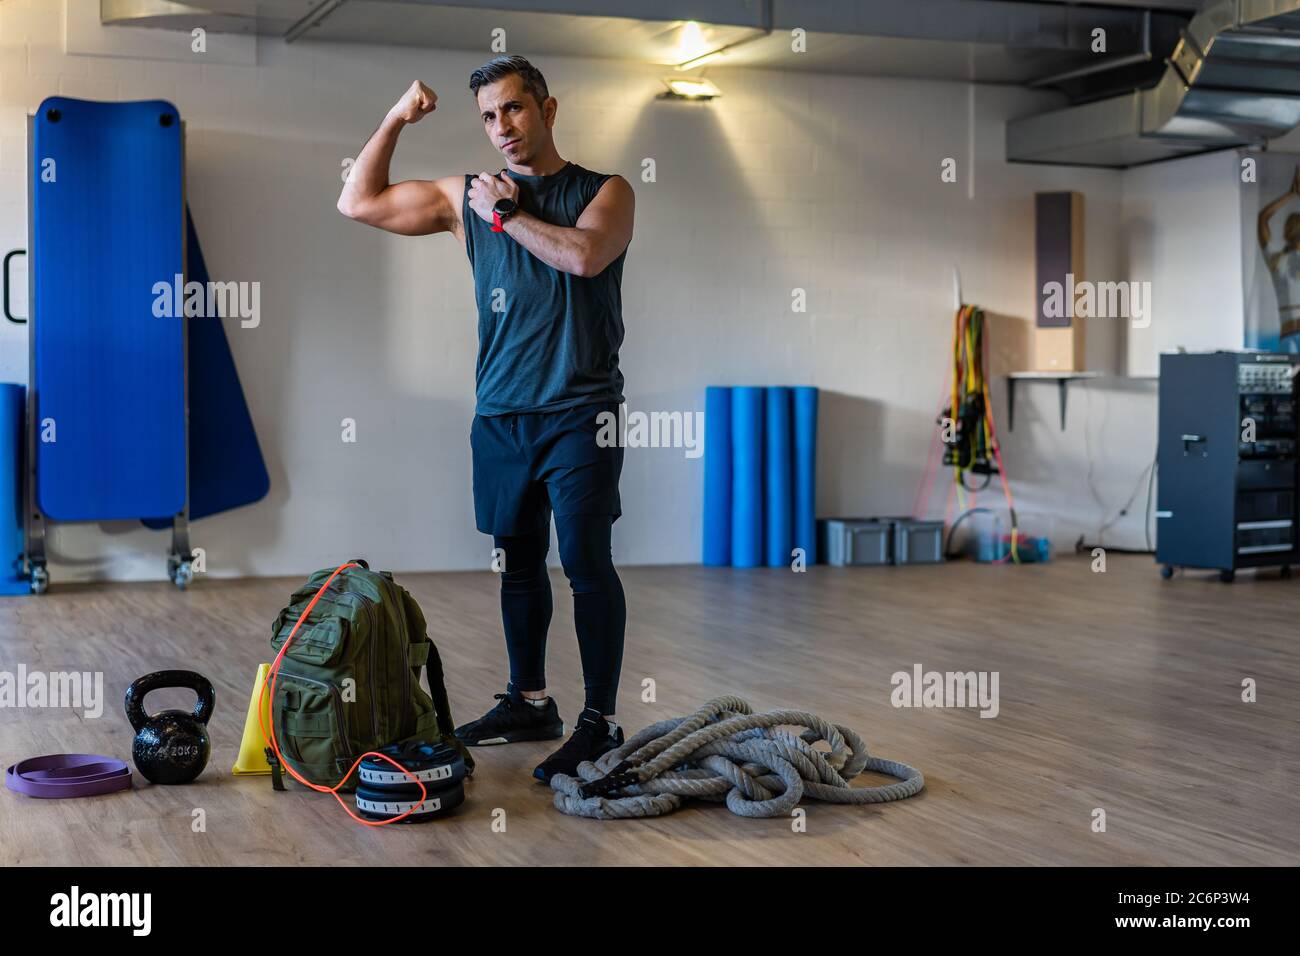 Motivated boot camp instructor stands with gym equipment in gym hall. Dumbbells, rope, sandbag on wooden floor. Portrait of instructor showing muscles Stock Photo